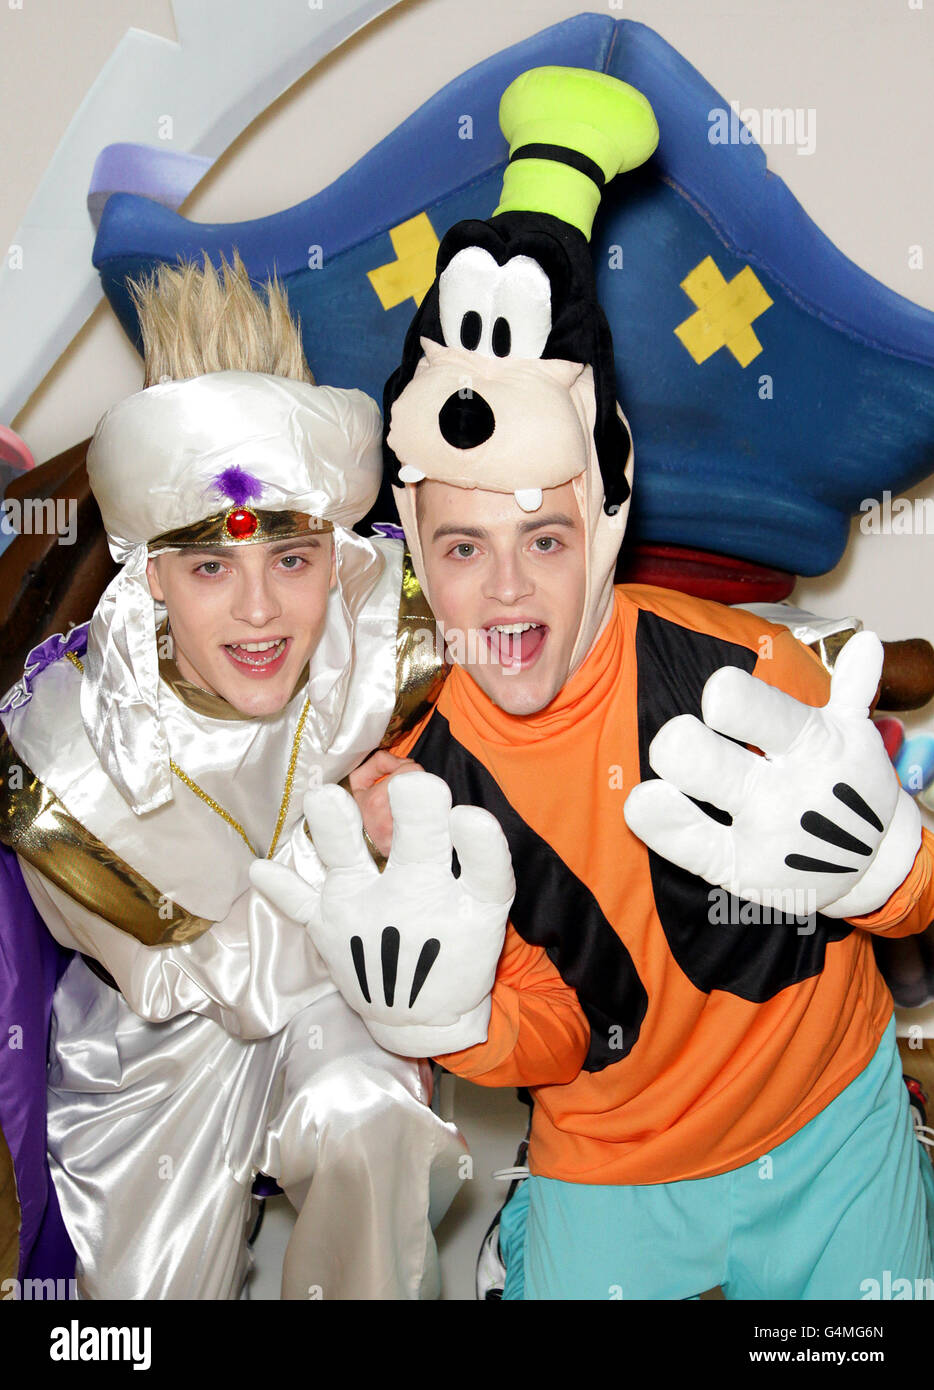 Jedward suit up as Goofy and Aladdin in Hamleys in central London for the launch of Disney Universe the video game. Stock Photo